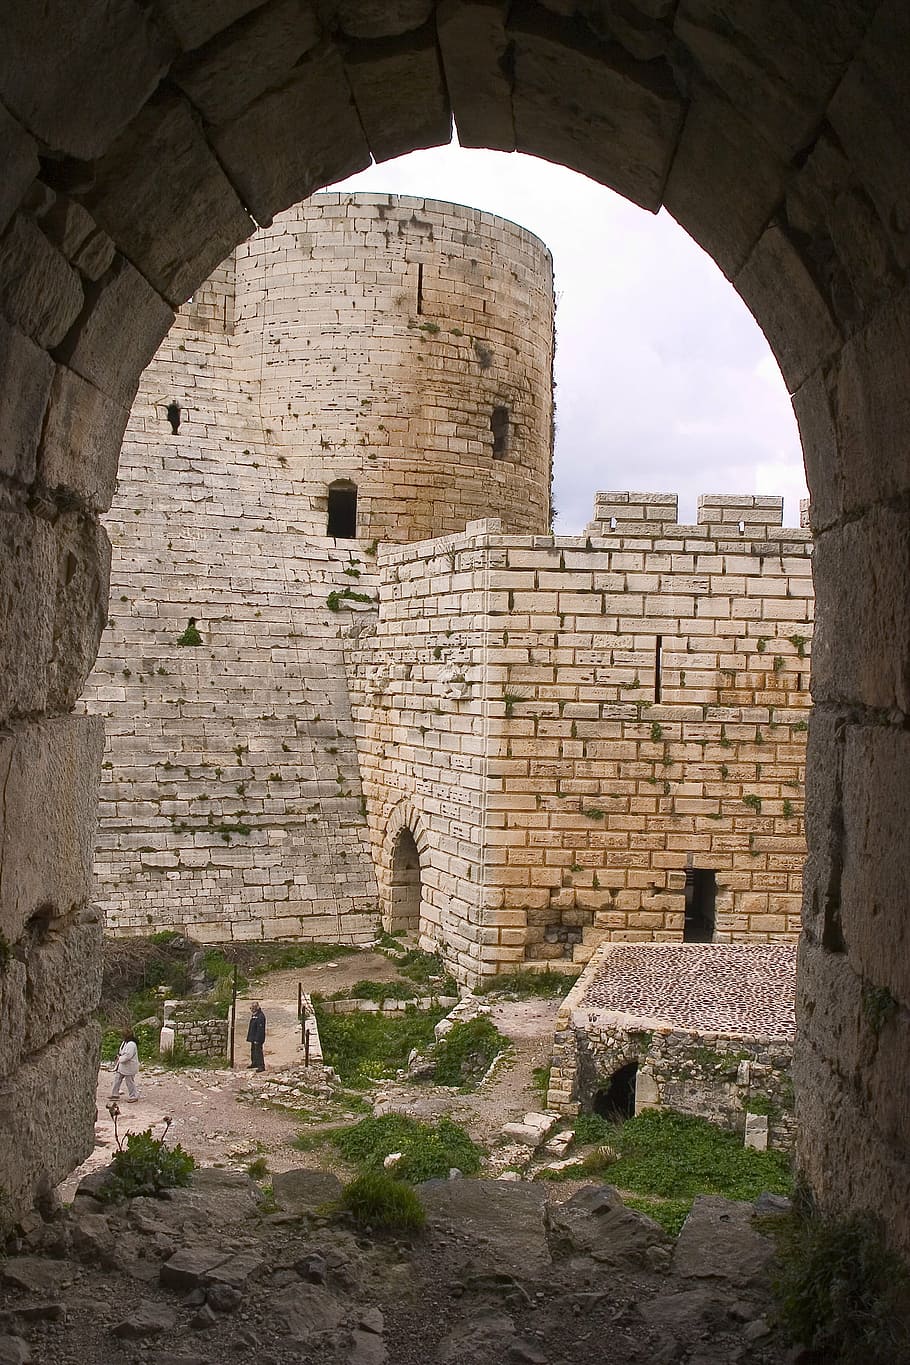 krak of chevaliers, crusader, syria, ancient cities, architecture, HD wallpaper